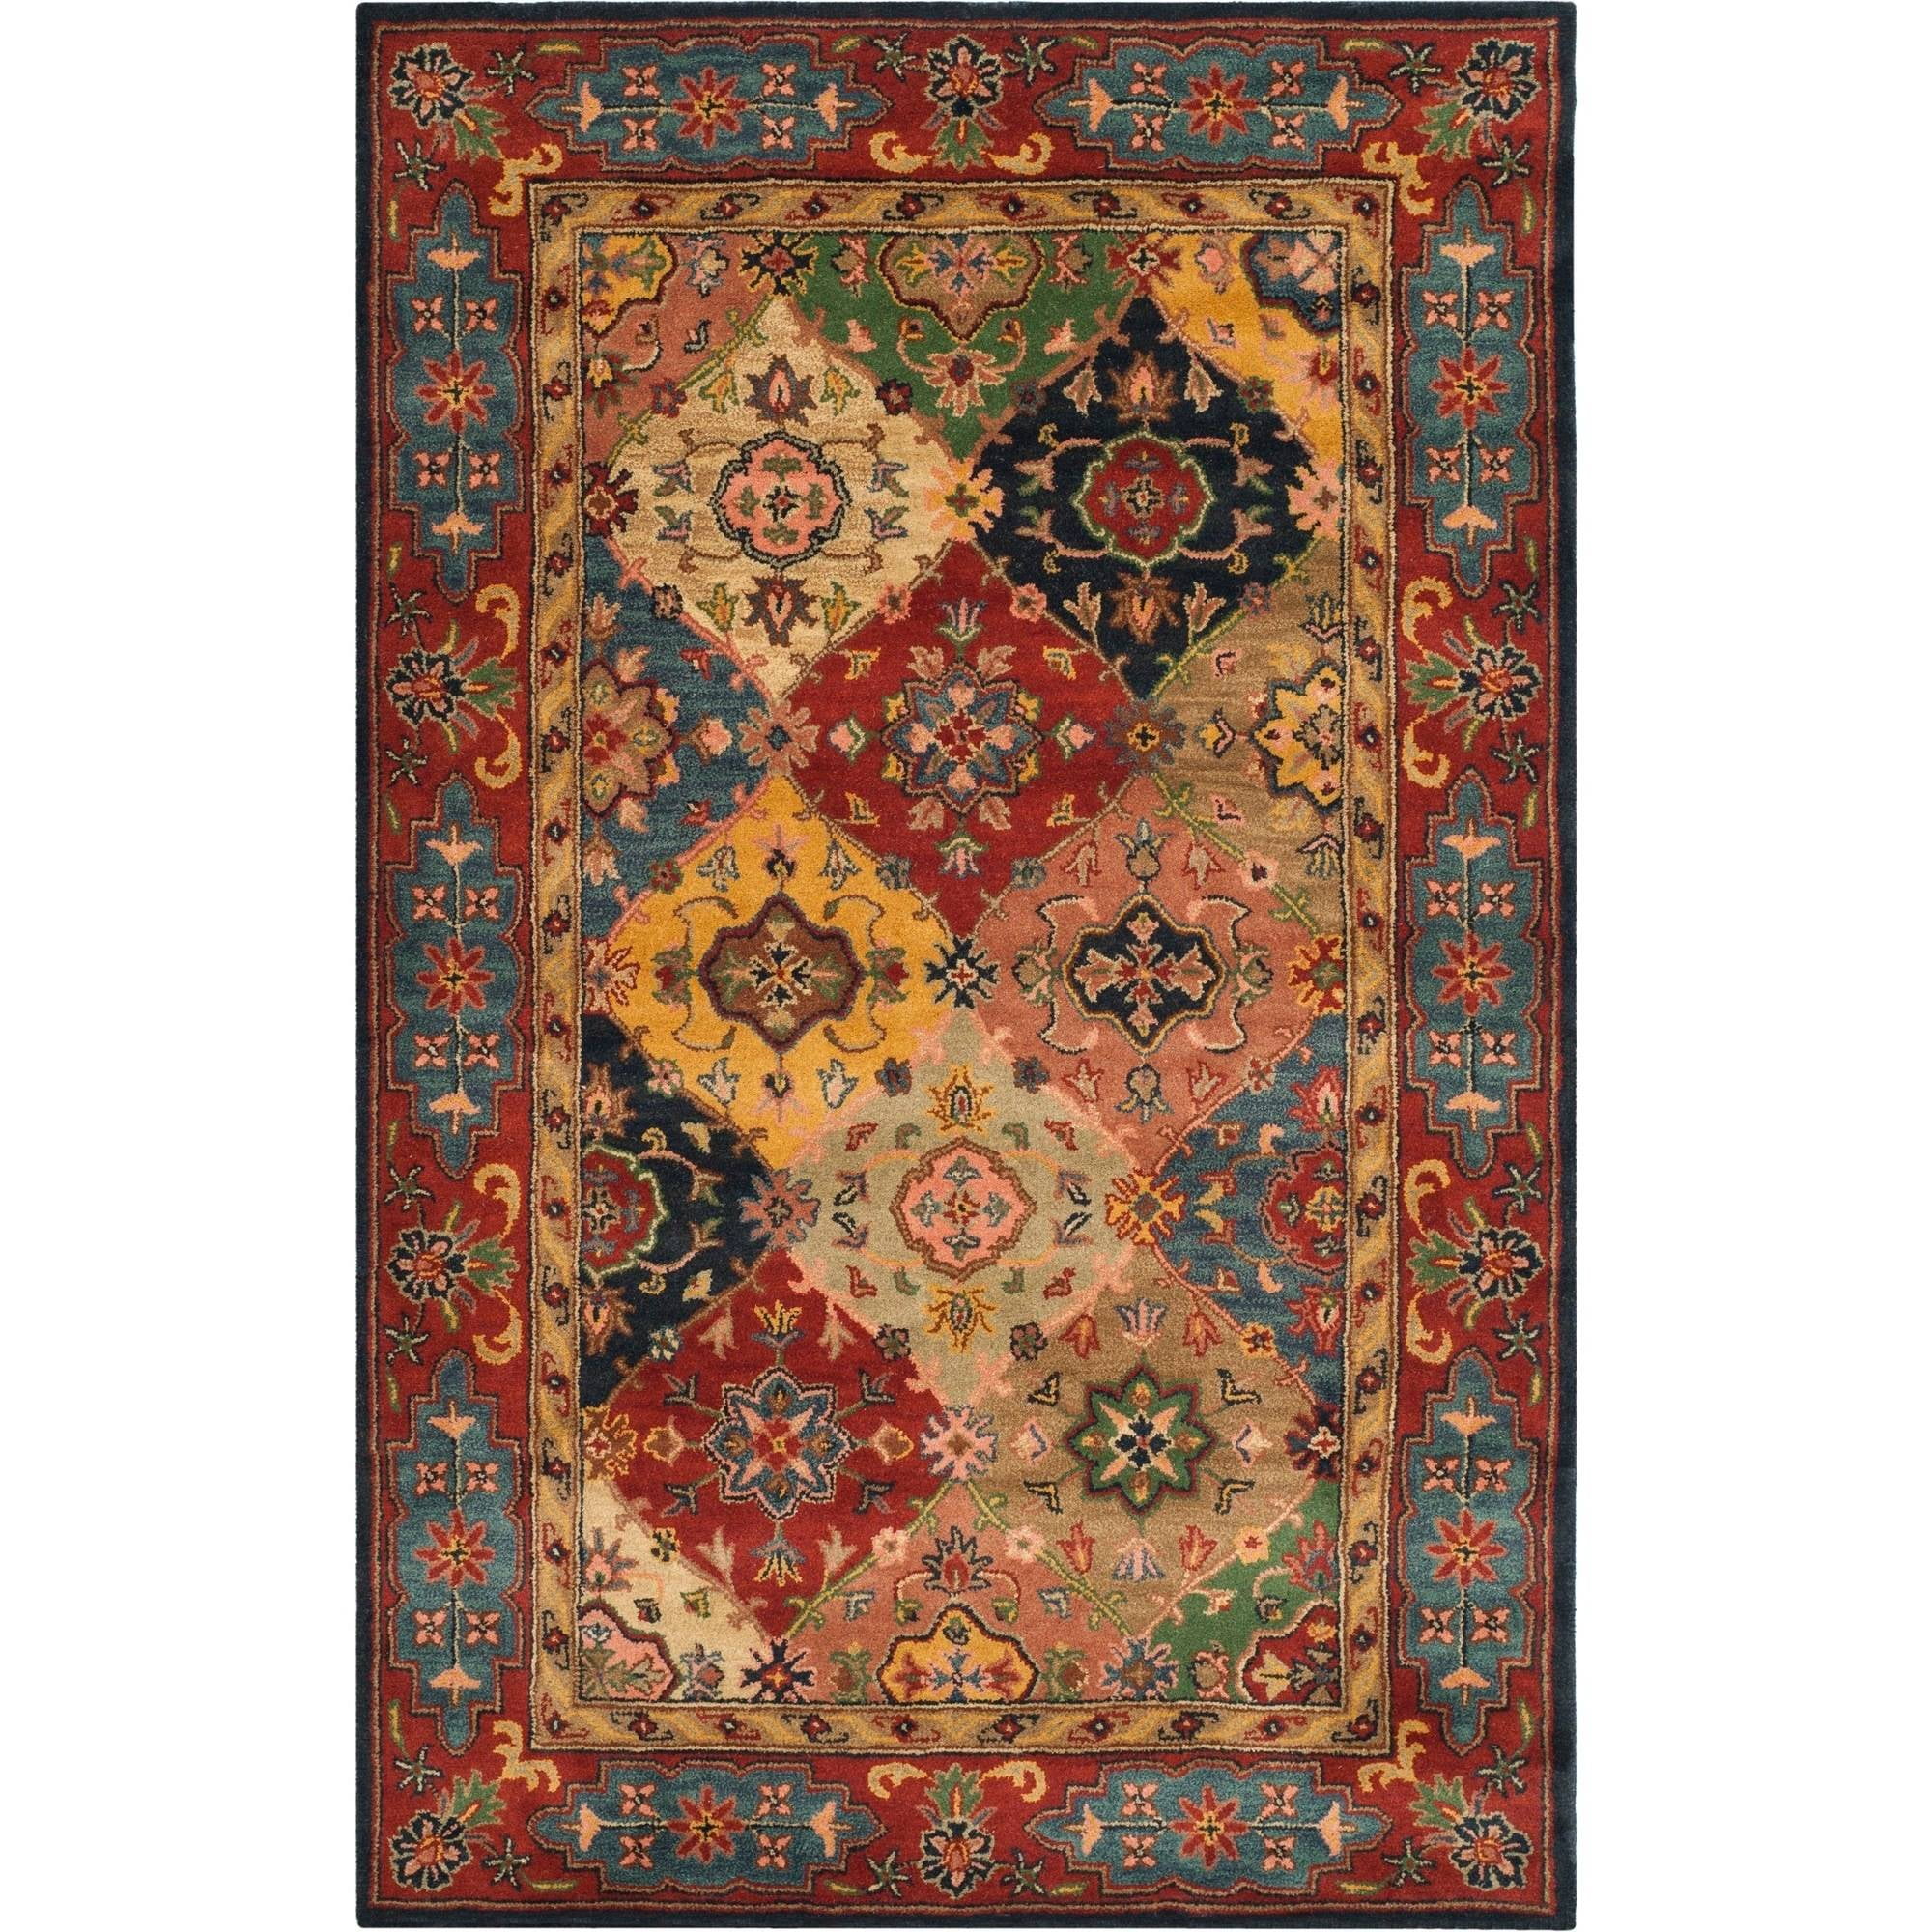 LARGE TRADITIONAL CLASSIC THICK LUXURY SOFT WOOL-LOOK HERITAGE RED QUALITY RUGS 